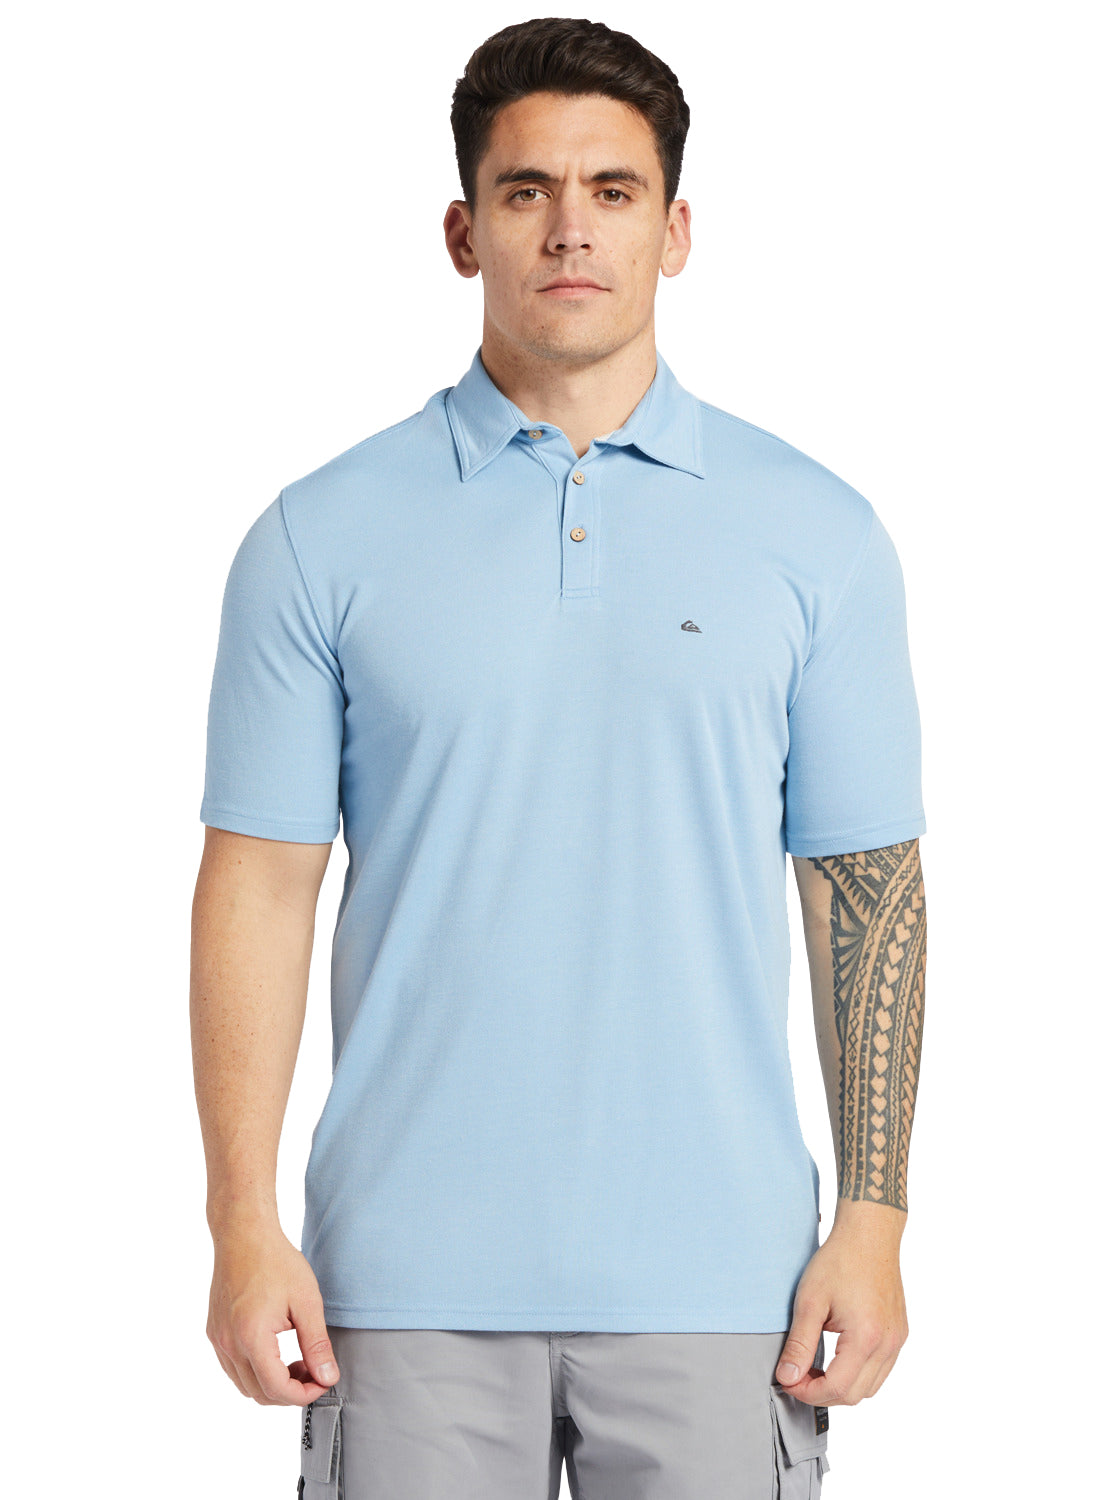 Quiksilver Waterman Waterpolo SS Polo Shirt BHC0 L